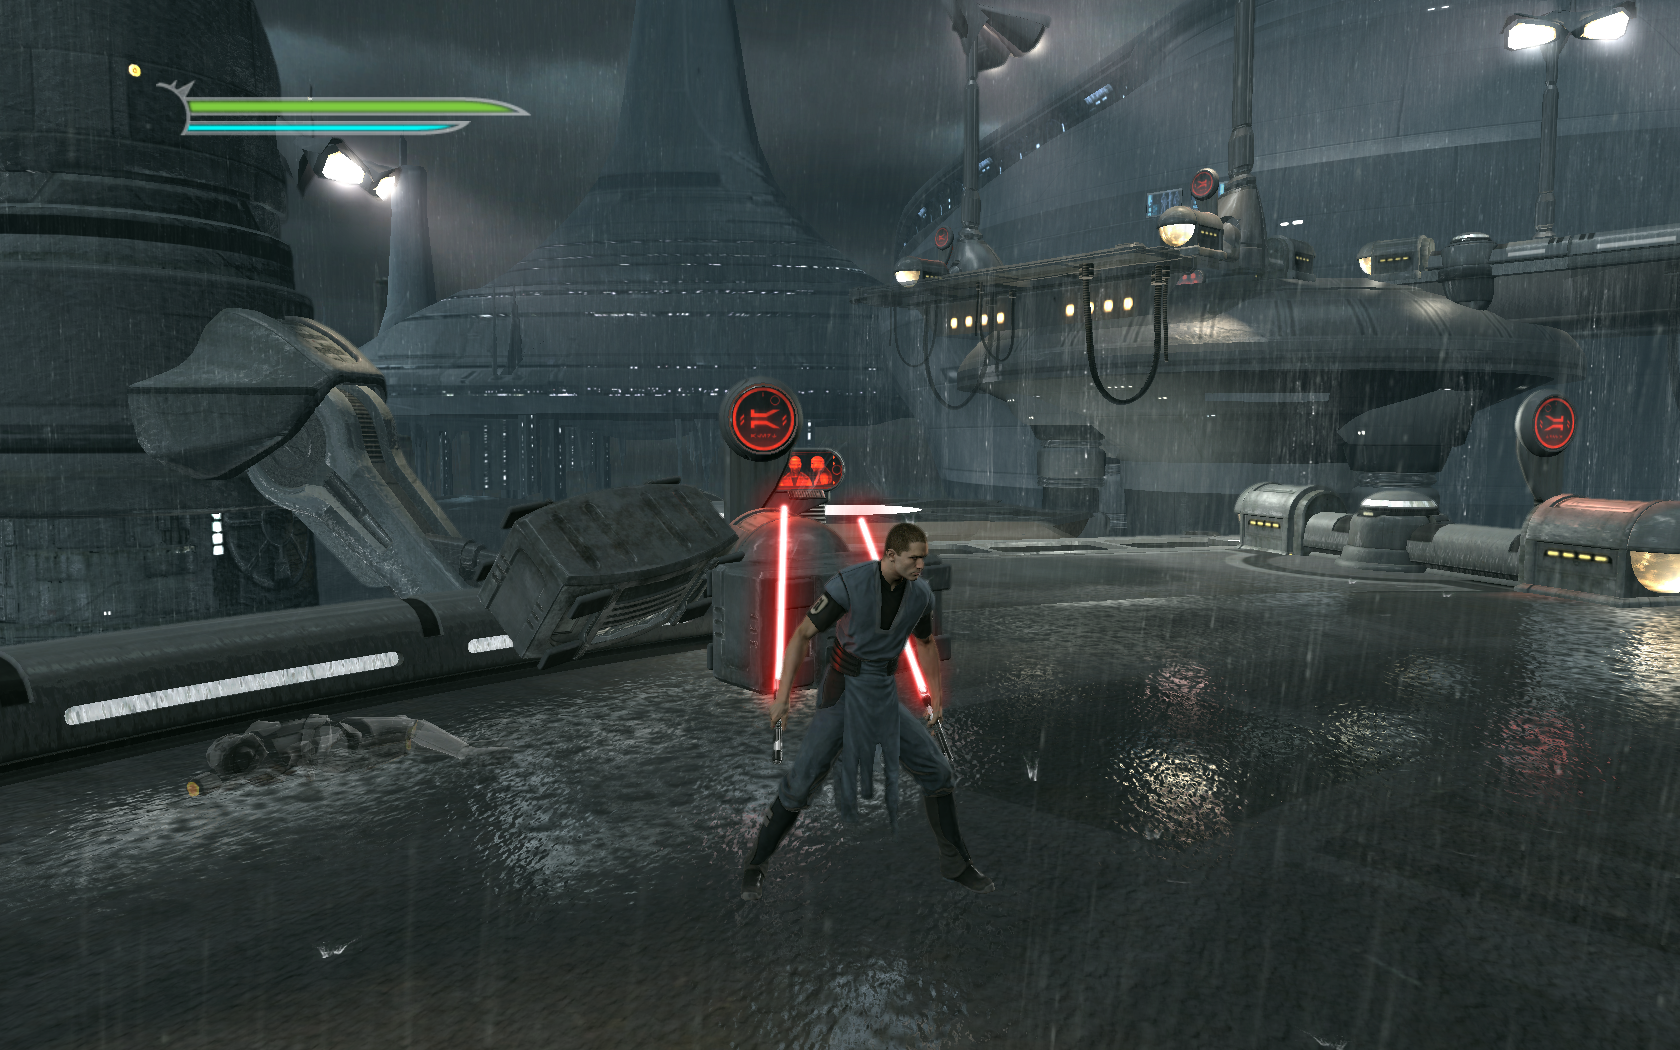 Новые игры star wars. Star Wars unleashed 2. Стар ВАРС the Force unleashed 2. Игра Star Wars unleashed 3. Star Wars Starkiller игра.